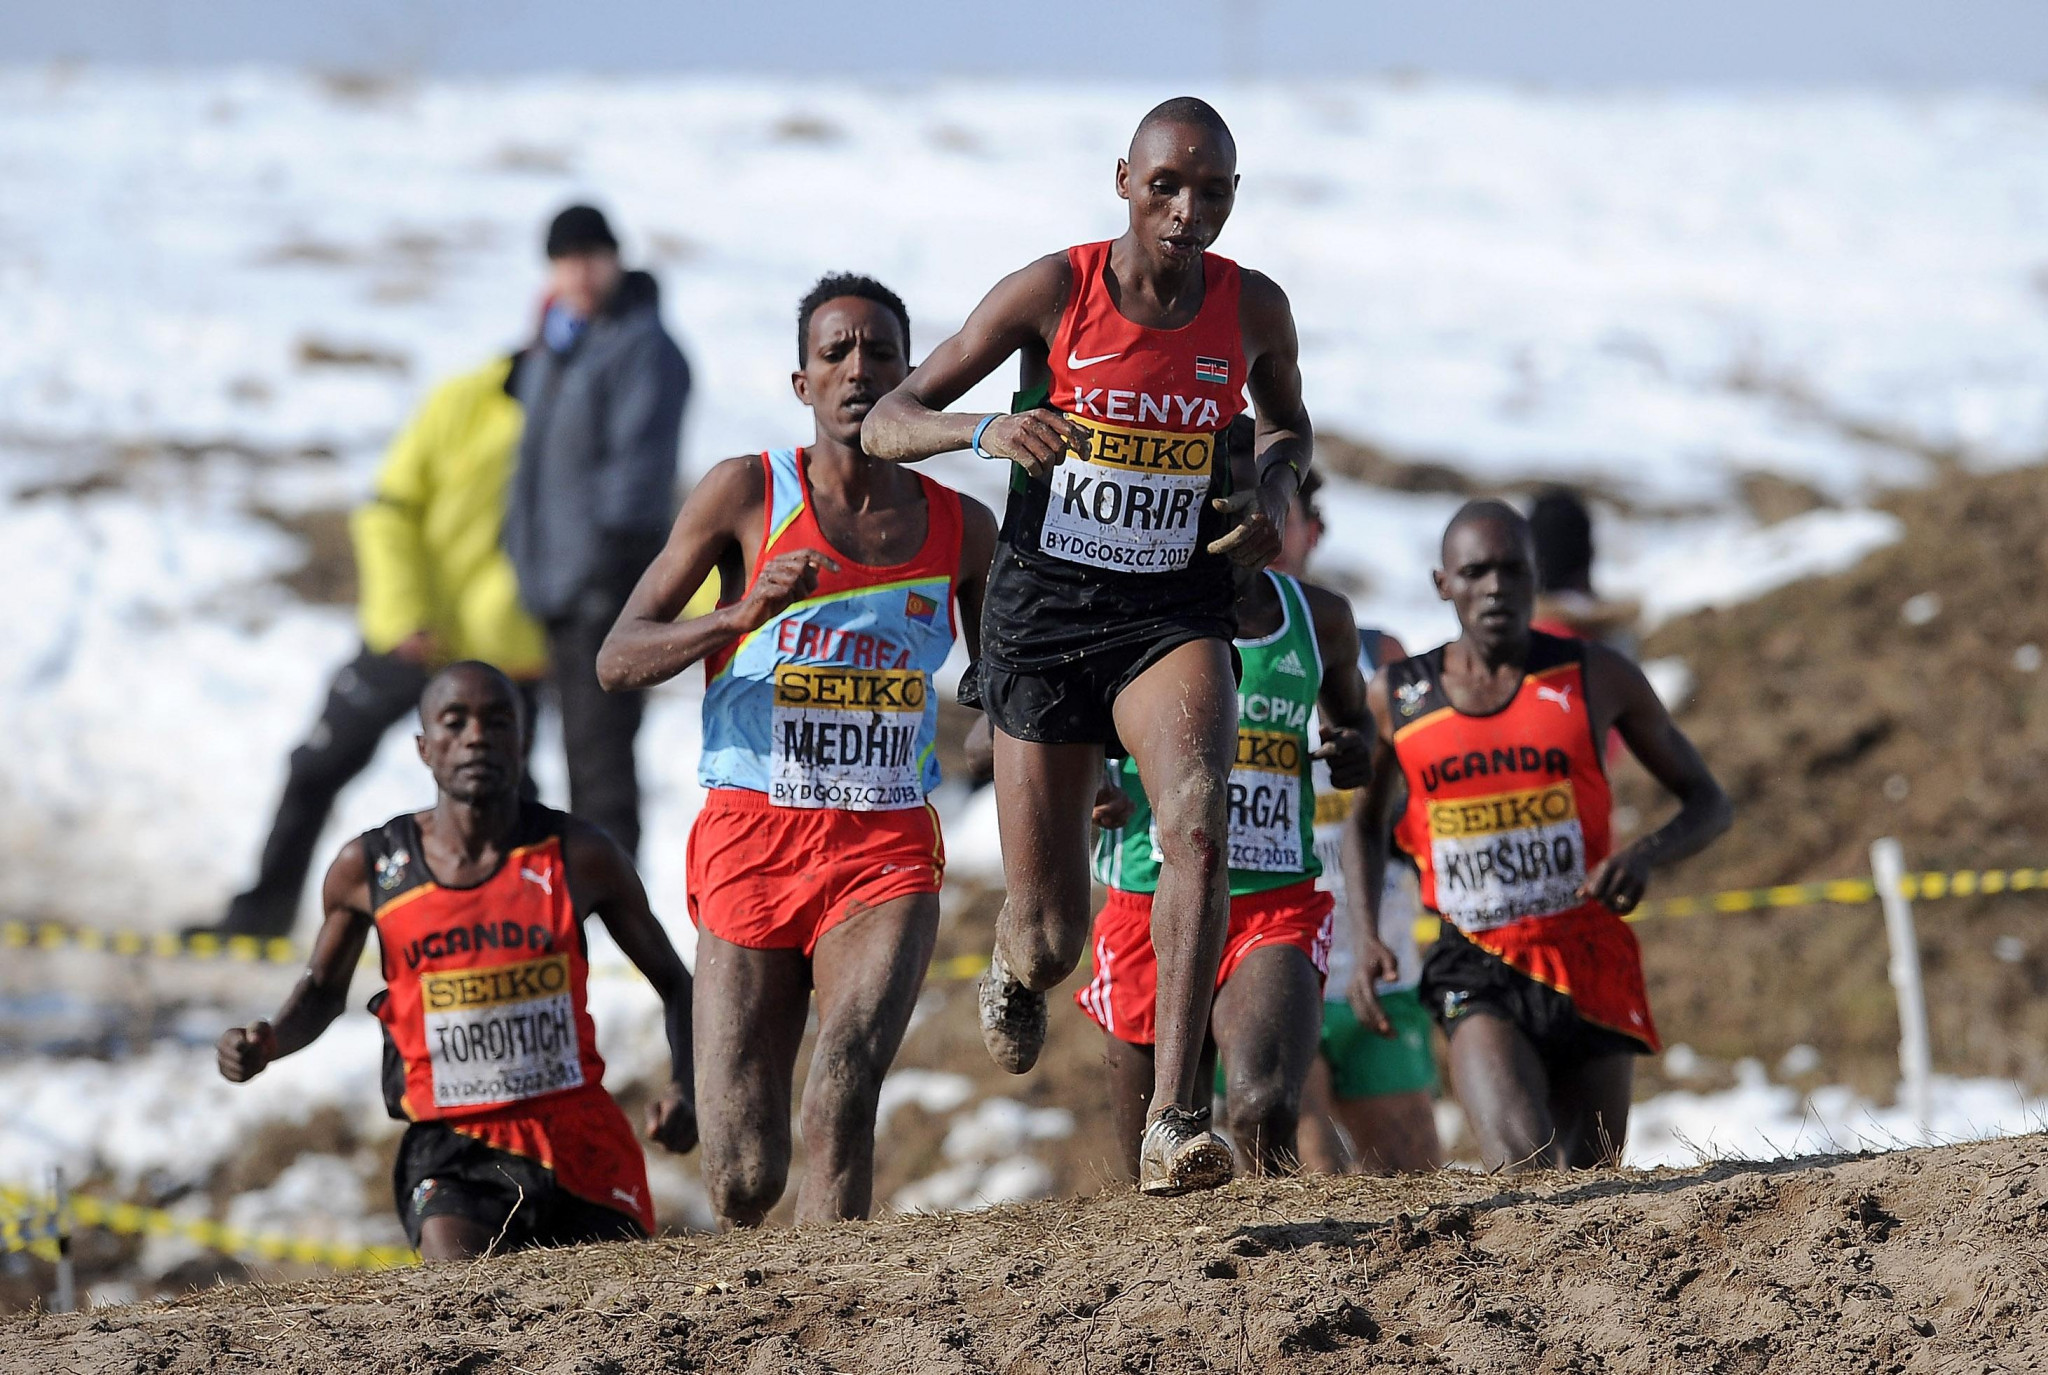 The IAAF World Cross Country Championships is due to take place in Aarhus on March 30  ©IAAF